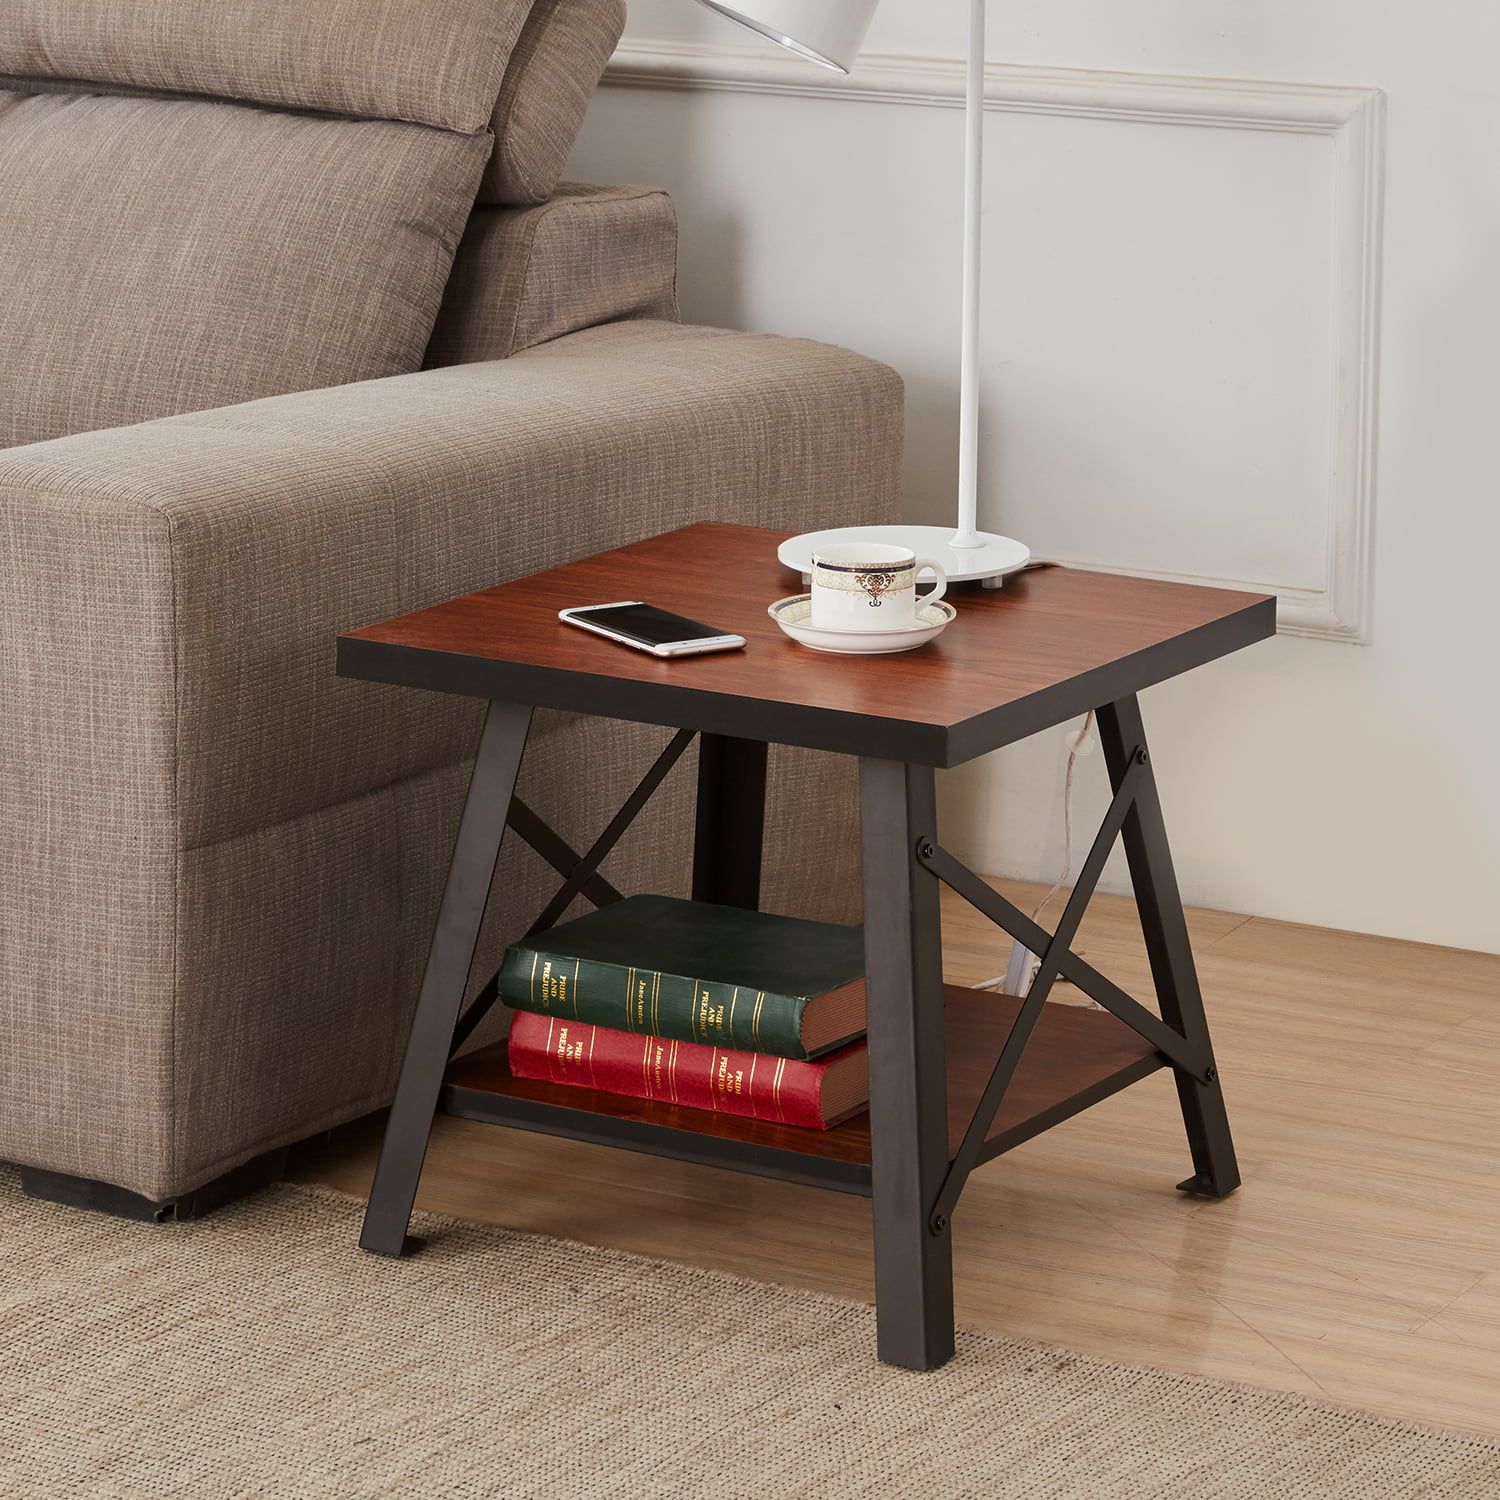 20" Open Storage Shelf Coffee Table End Table Square,industrial Style Regarding Coffee Tables With Open Storage Shelves (Photo 5 of 15)